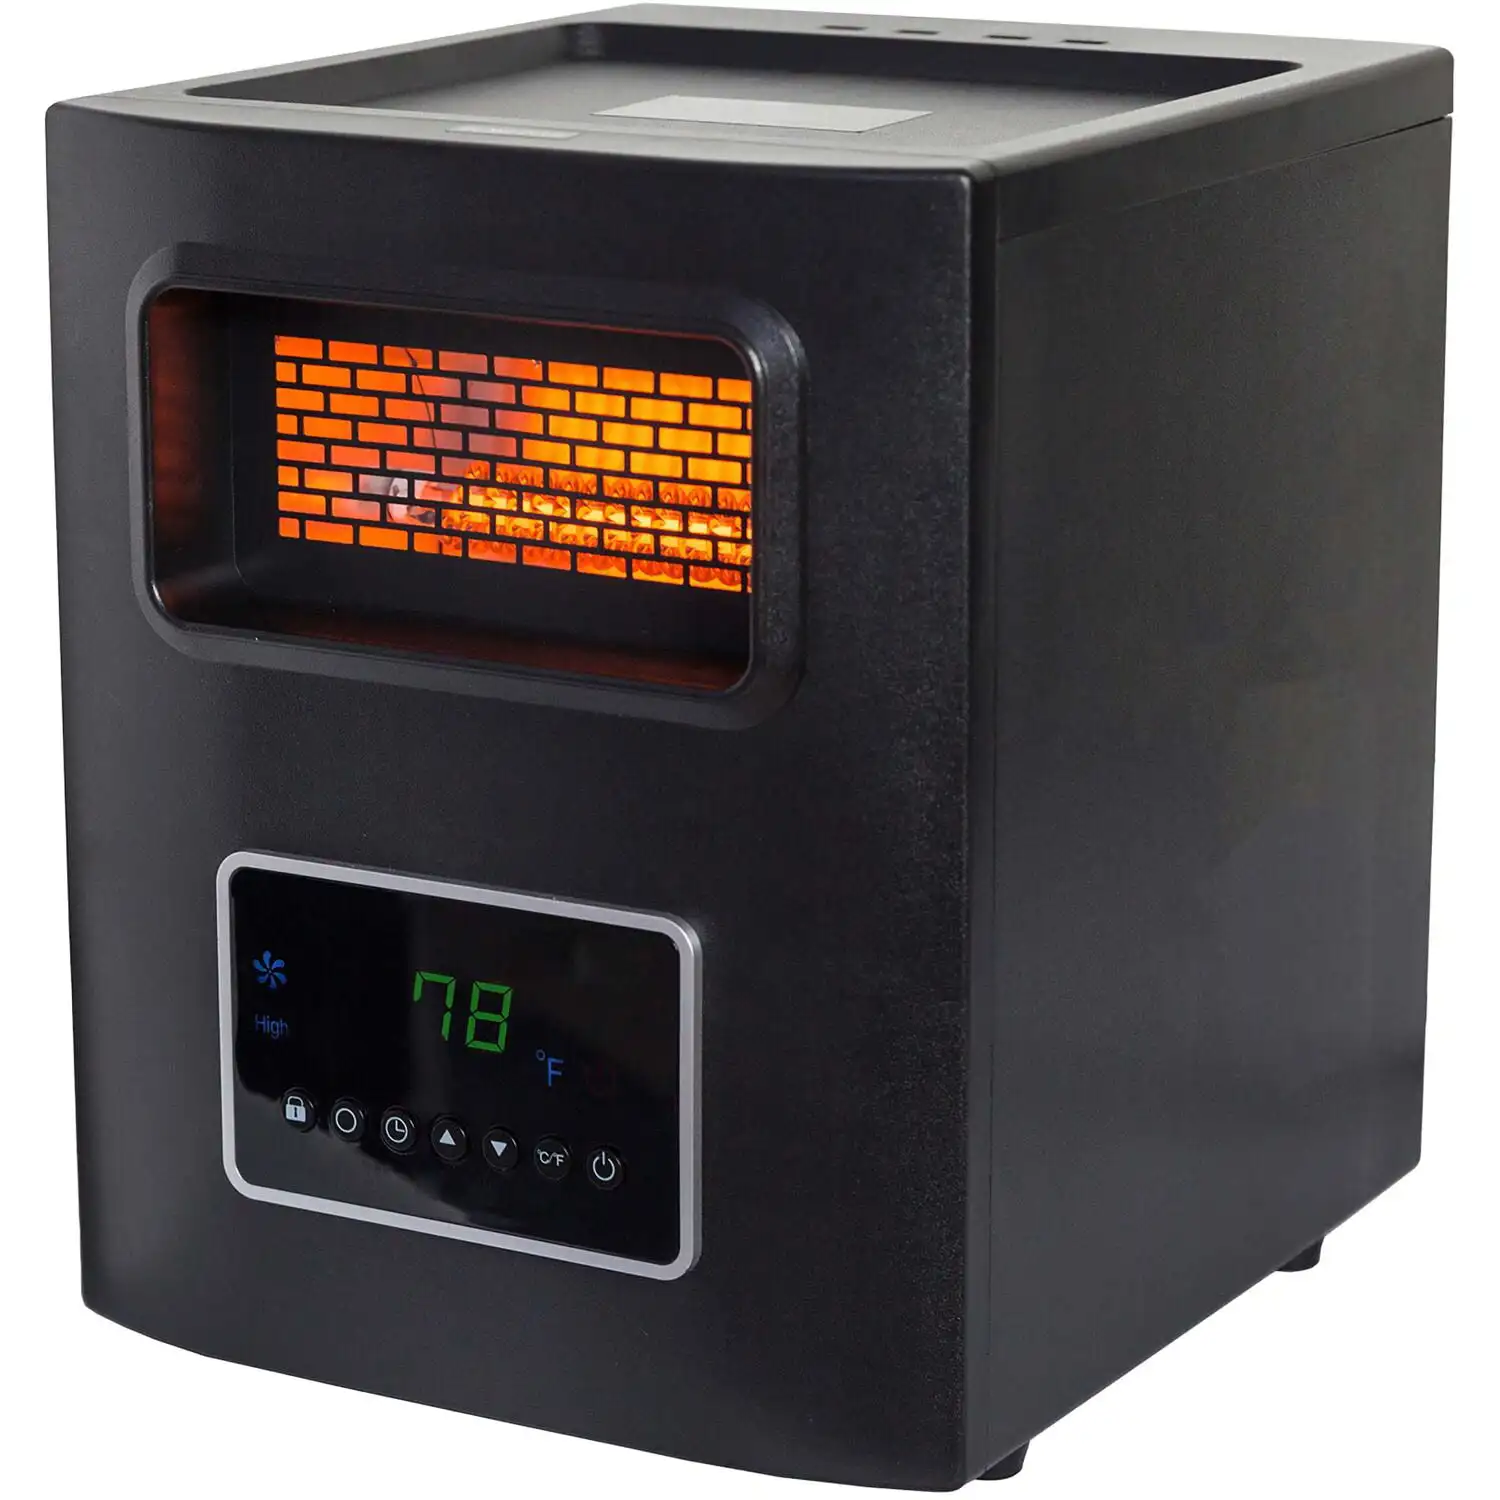 

LifeSmart 6-Wrapped Element Infrared Heater, KUH15-02